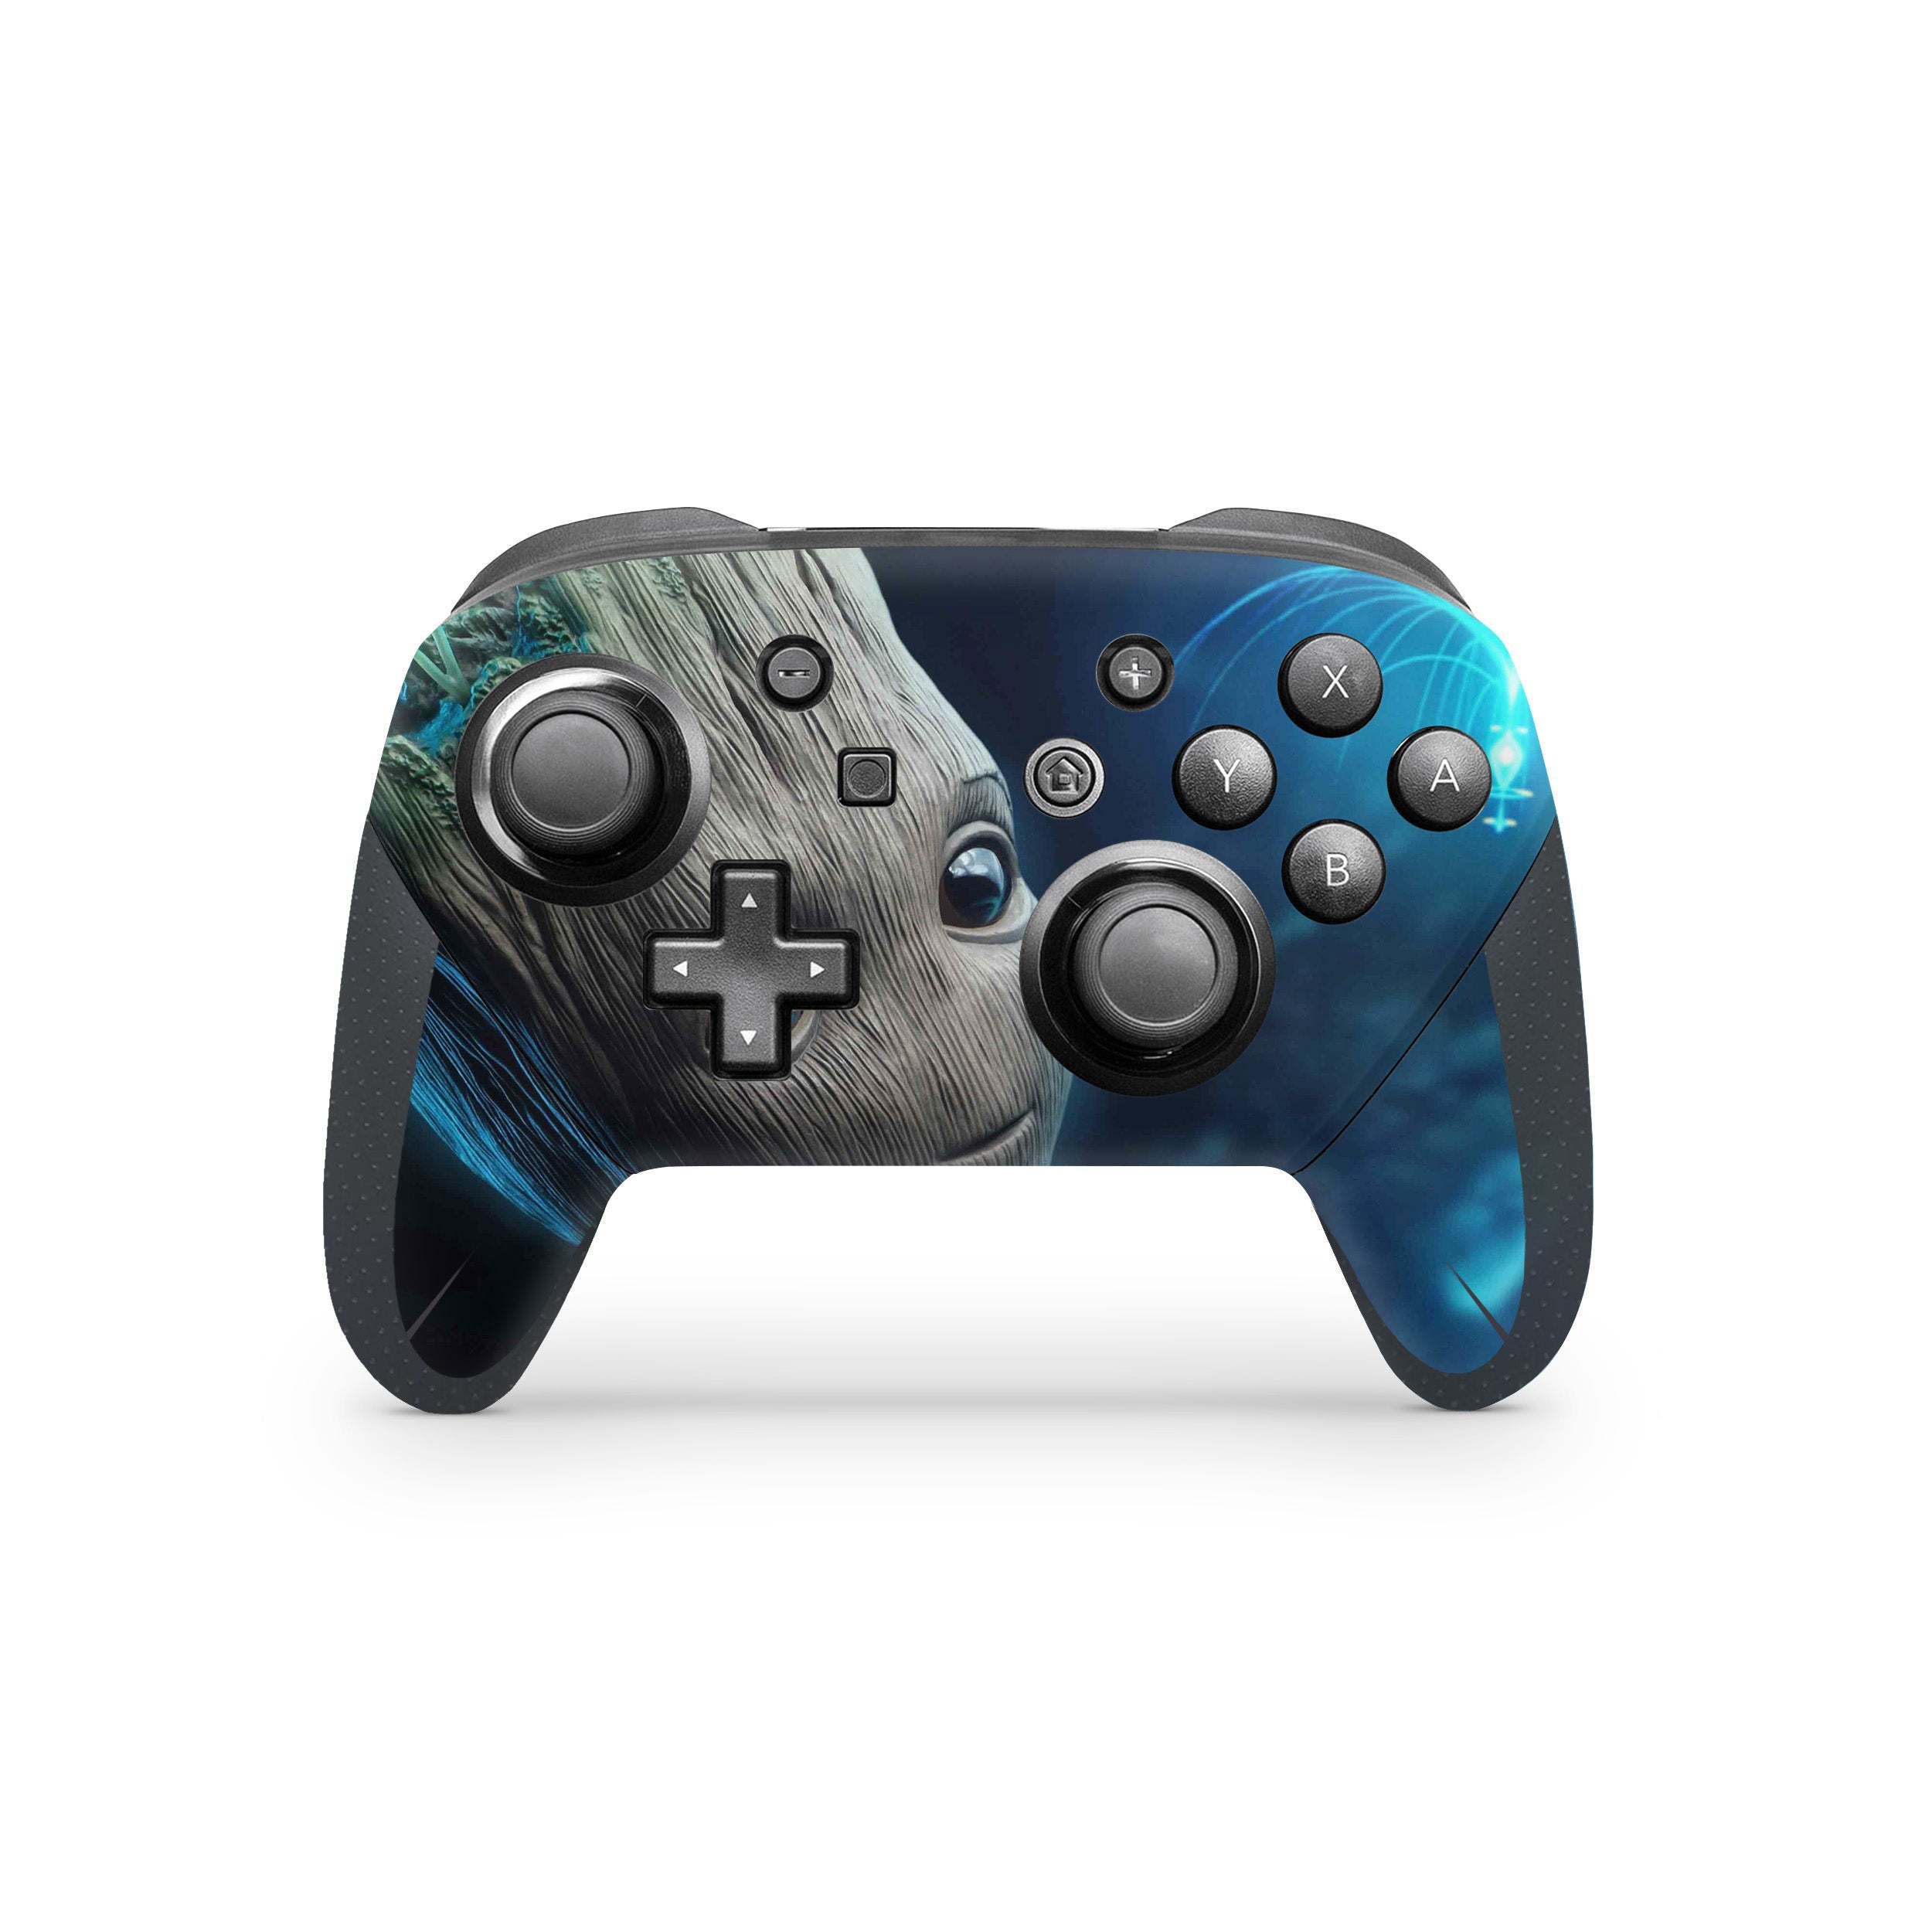 A video game skin featuring a Marvel Guardians of the Galaxy Groot design for the Switch Pro Controller.